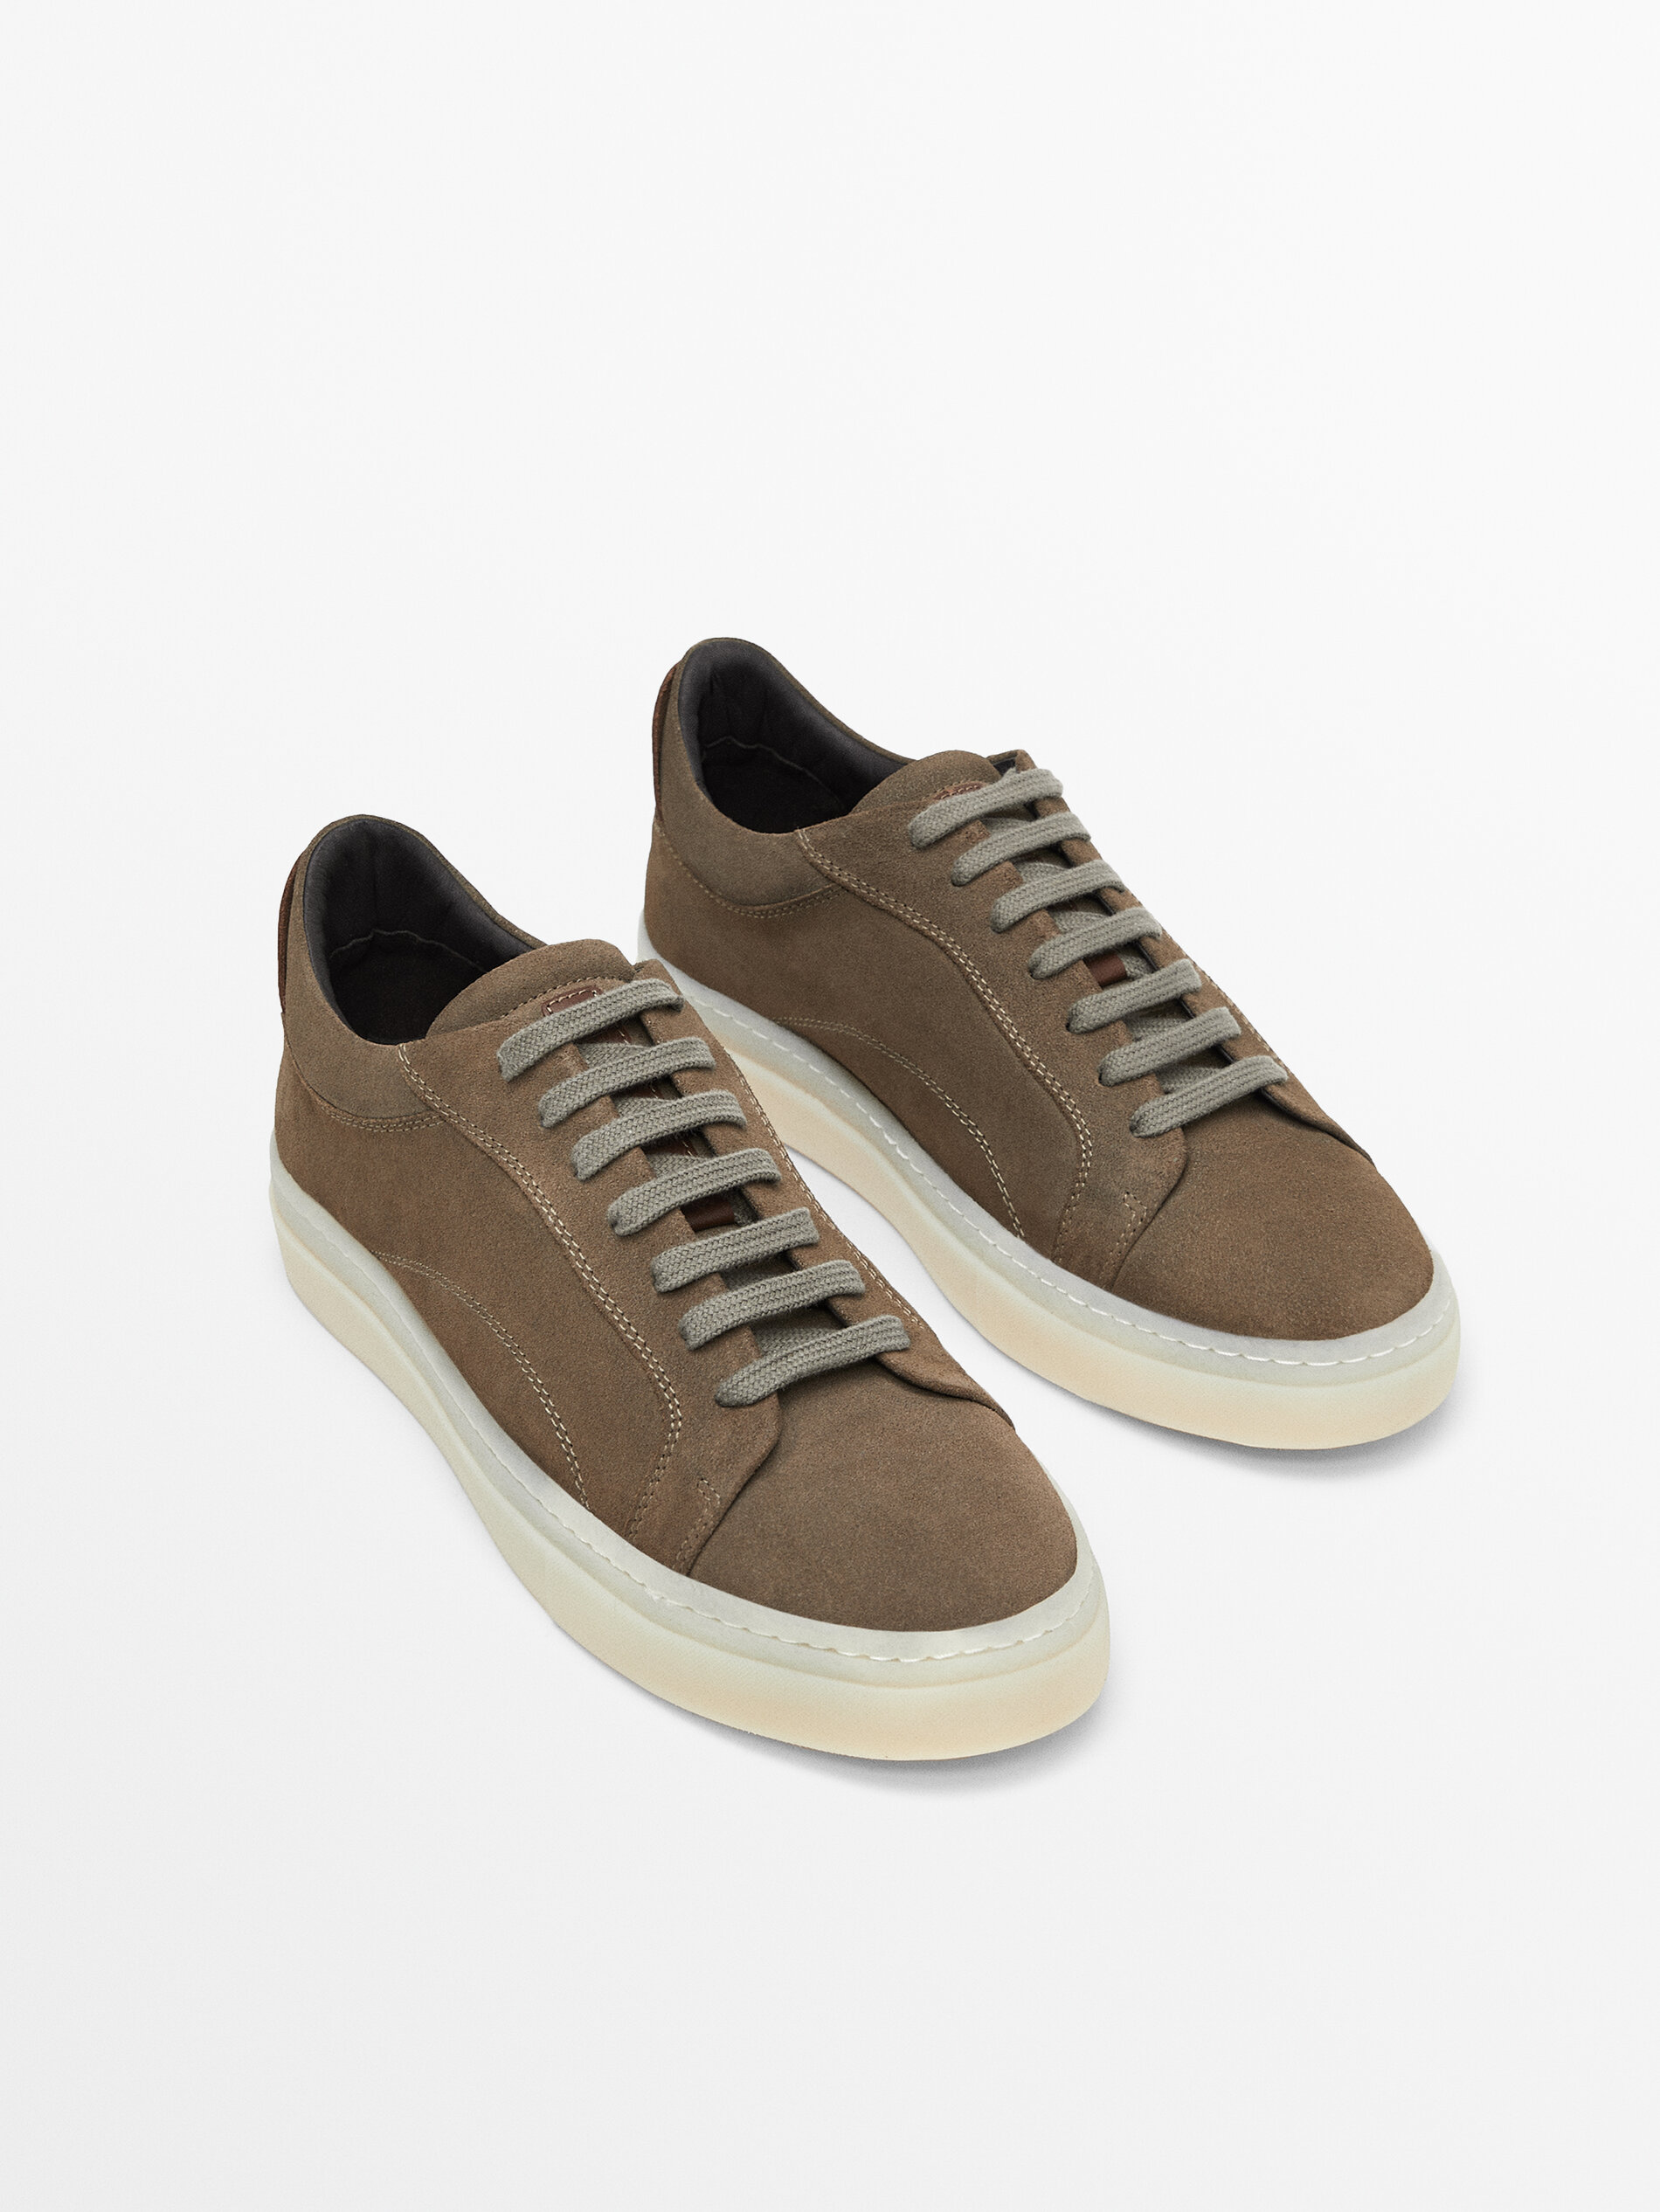 Massimo Dutti Split Suede Trainers With Translucent Soles - Big Apple Buddy